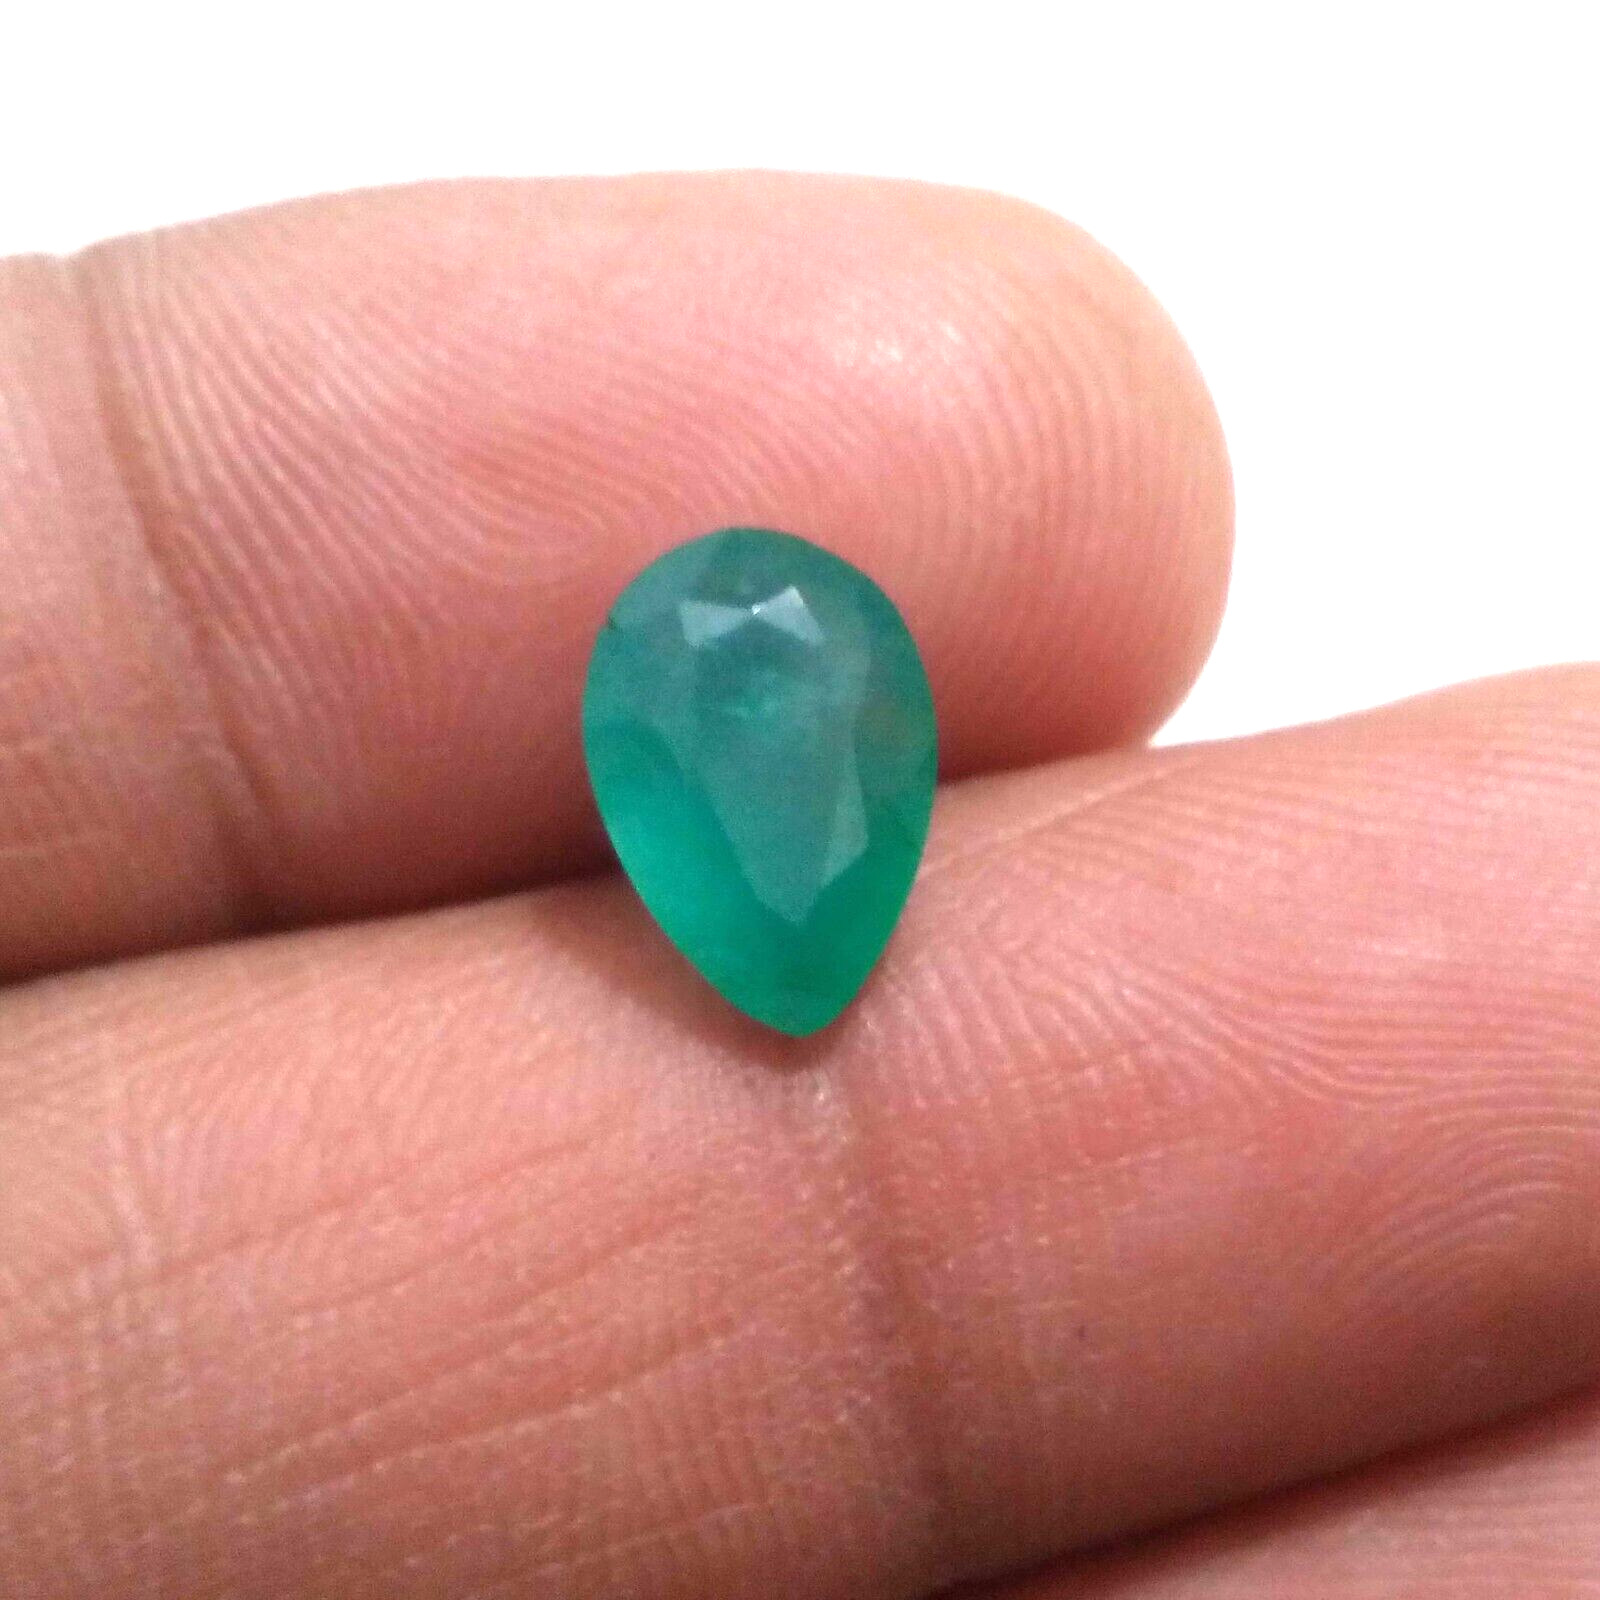 Top Quality Zambian Emerald Pear Shape 2.10 Crt Top Green Faceted Loose Gemstone